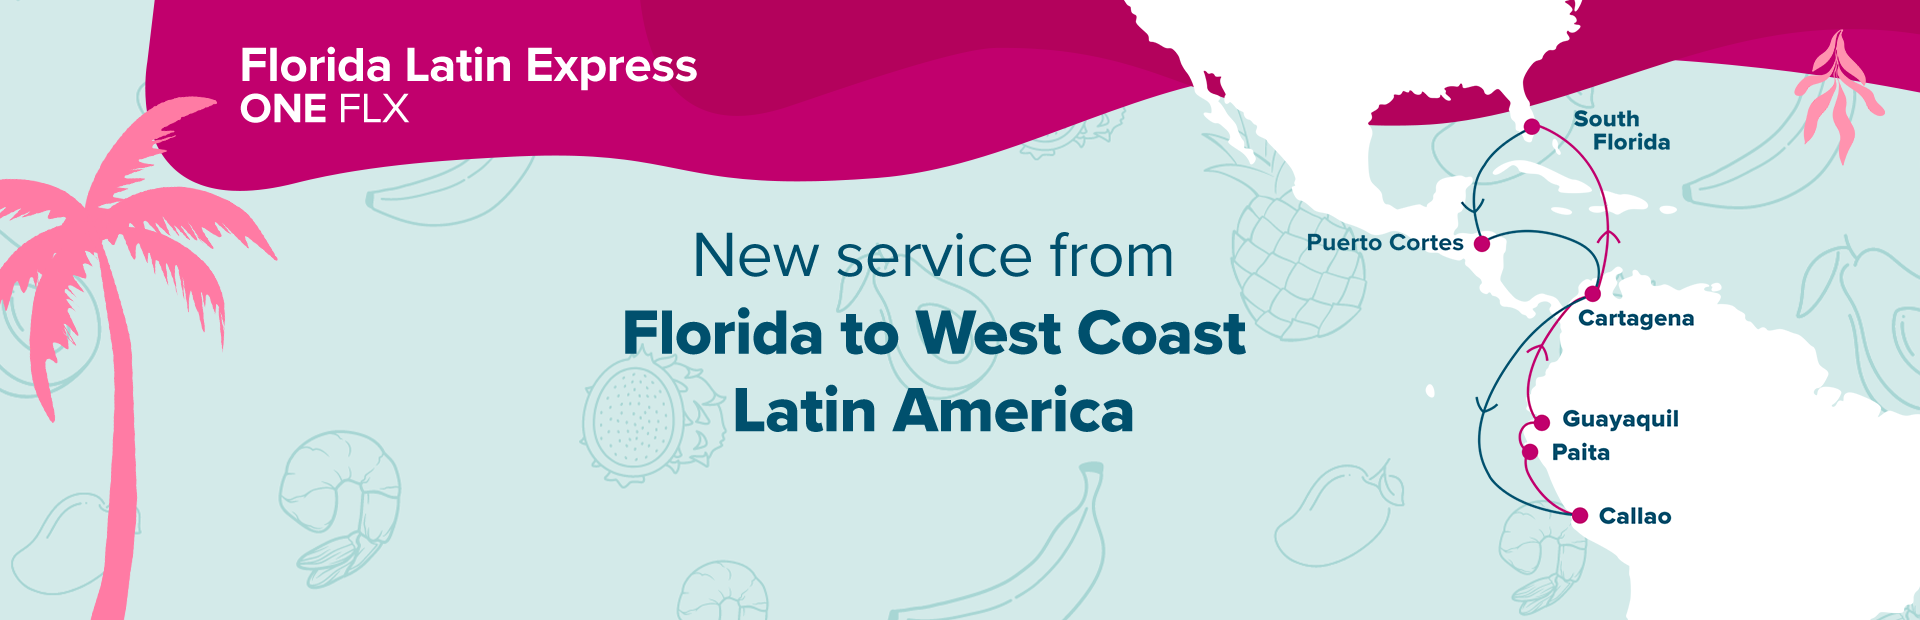 New service from Florida to West Coast Latin America